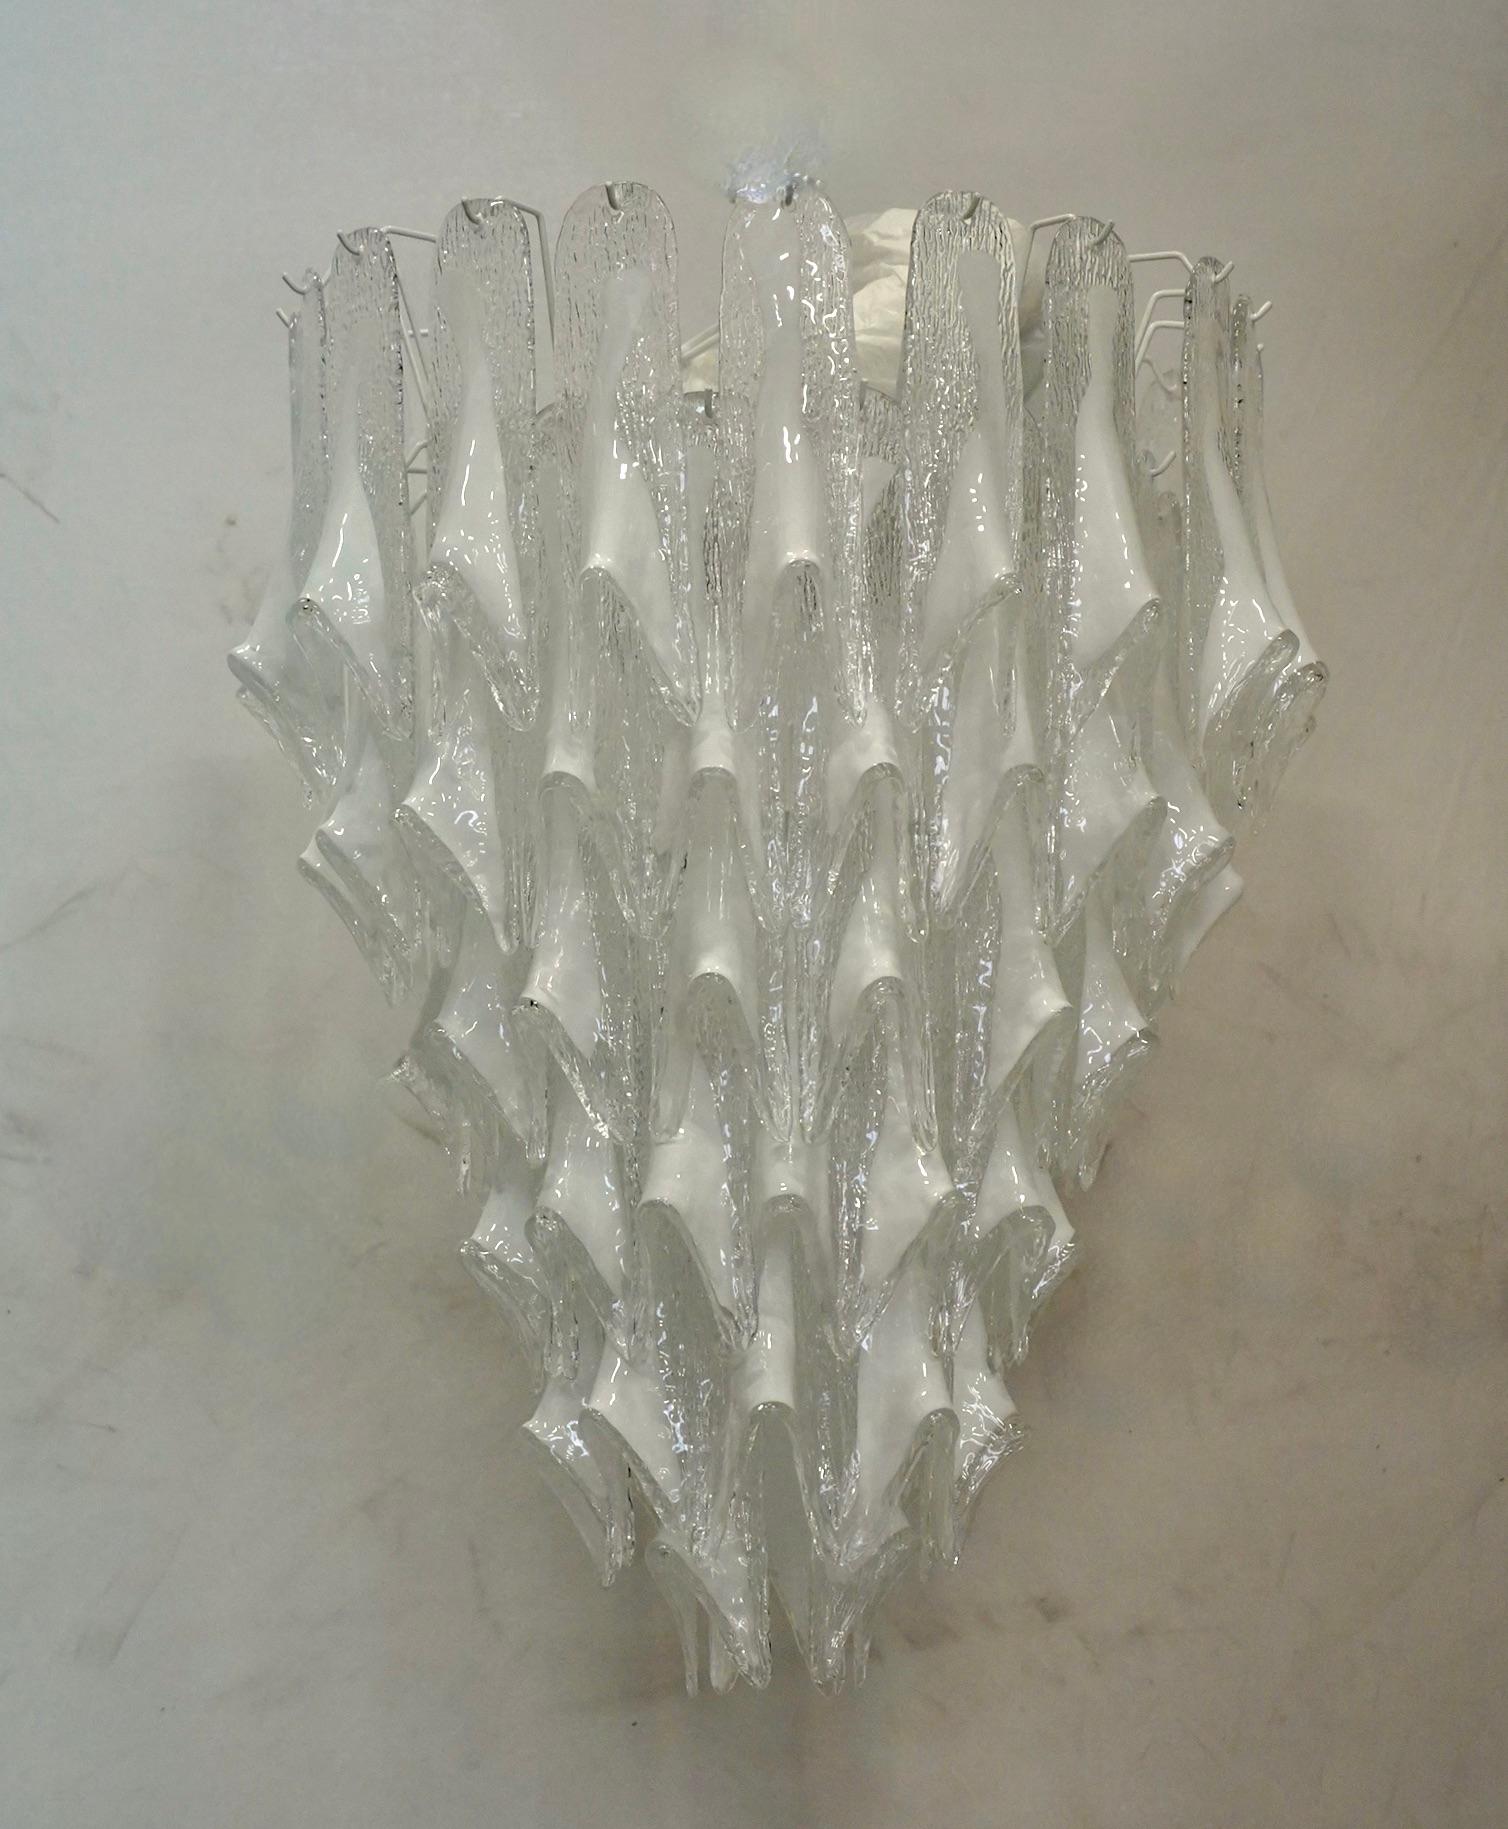 Extraordinary transparent white and color for this Murano chandelier, a strong white color with a unique transparency. Its white color is really guessed for a different and original chandelier from others. A beautiful stain of color above your